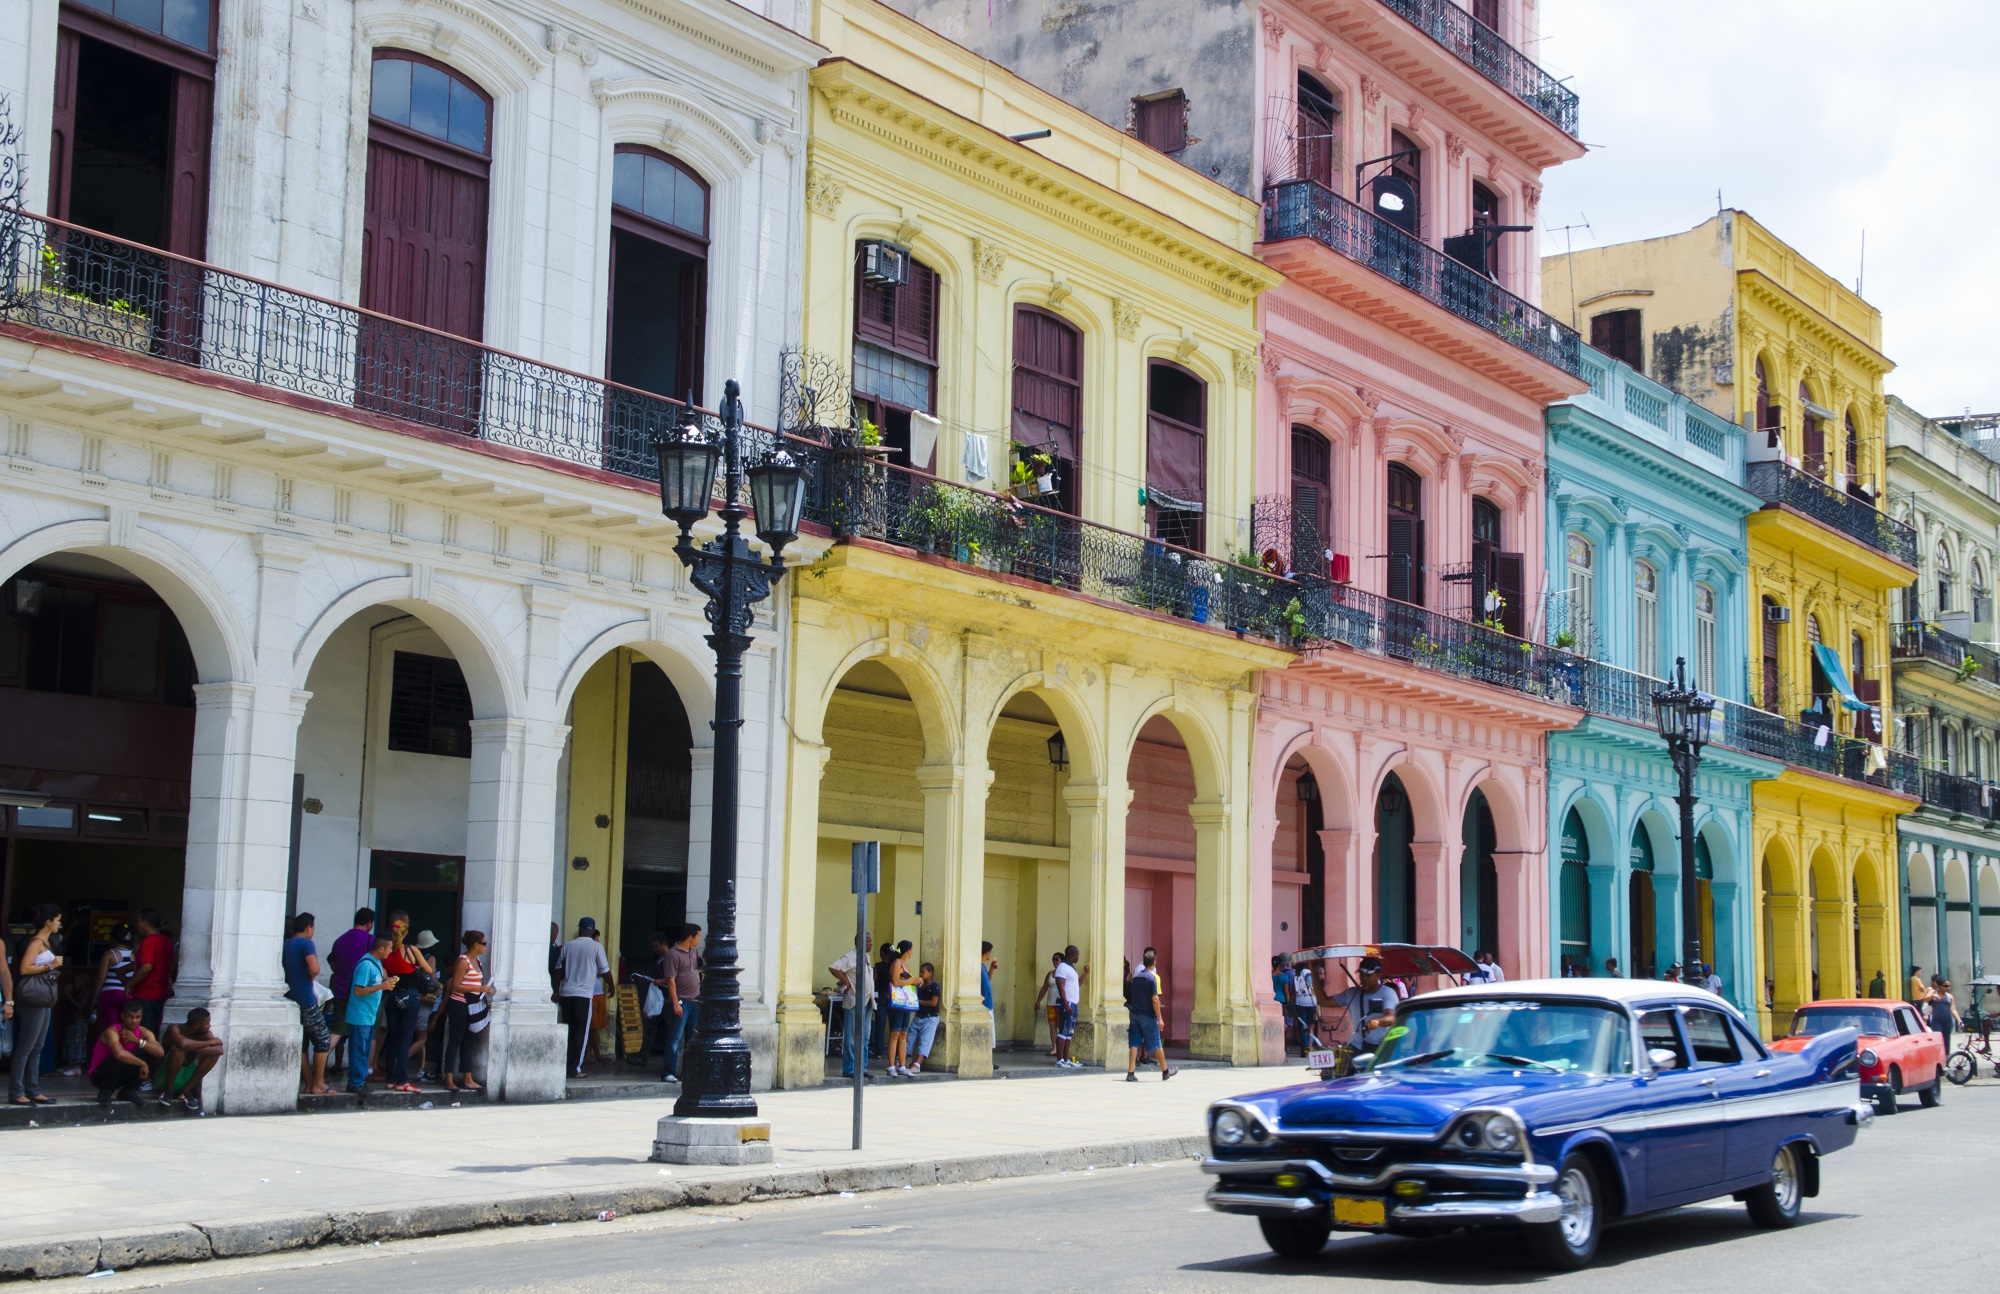 How to take a great vacation in Cuba despite Trump's new restrictions